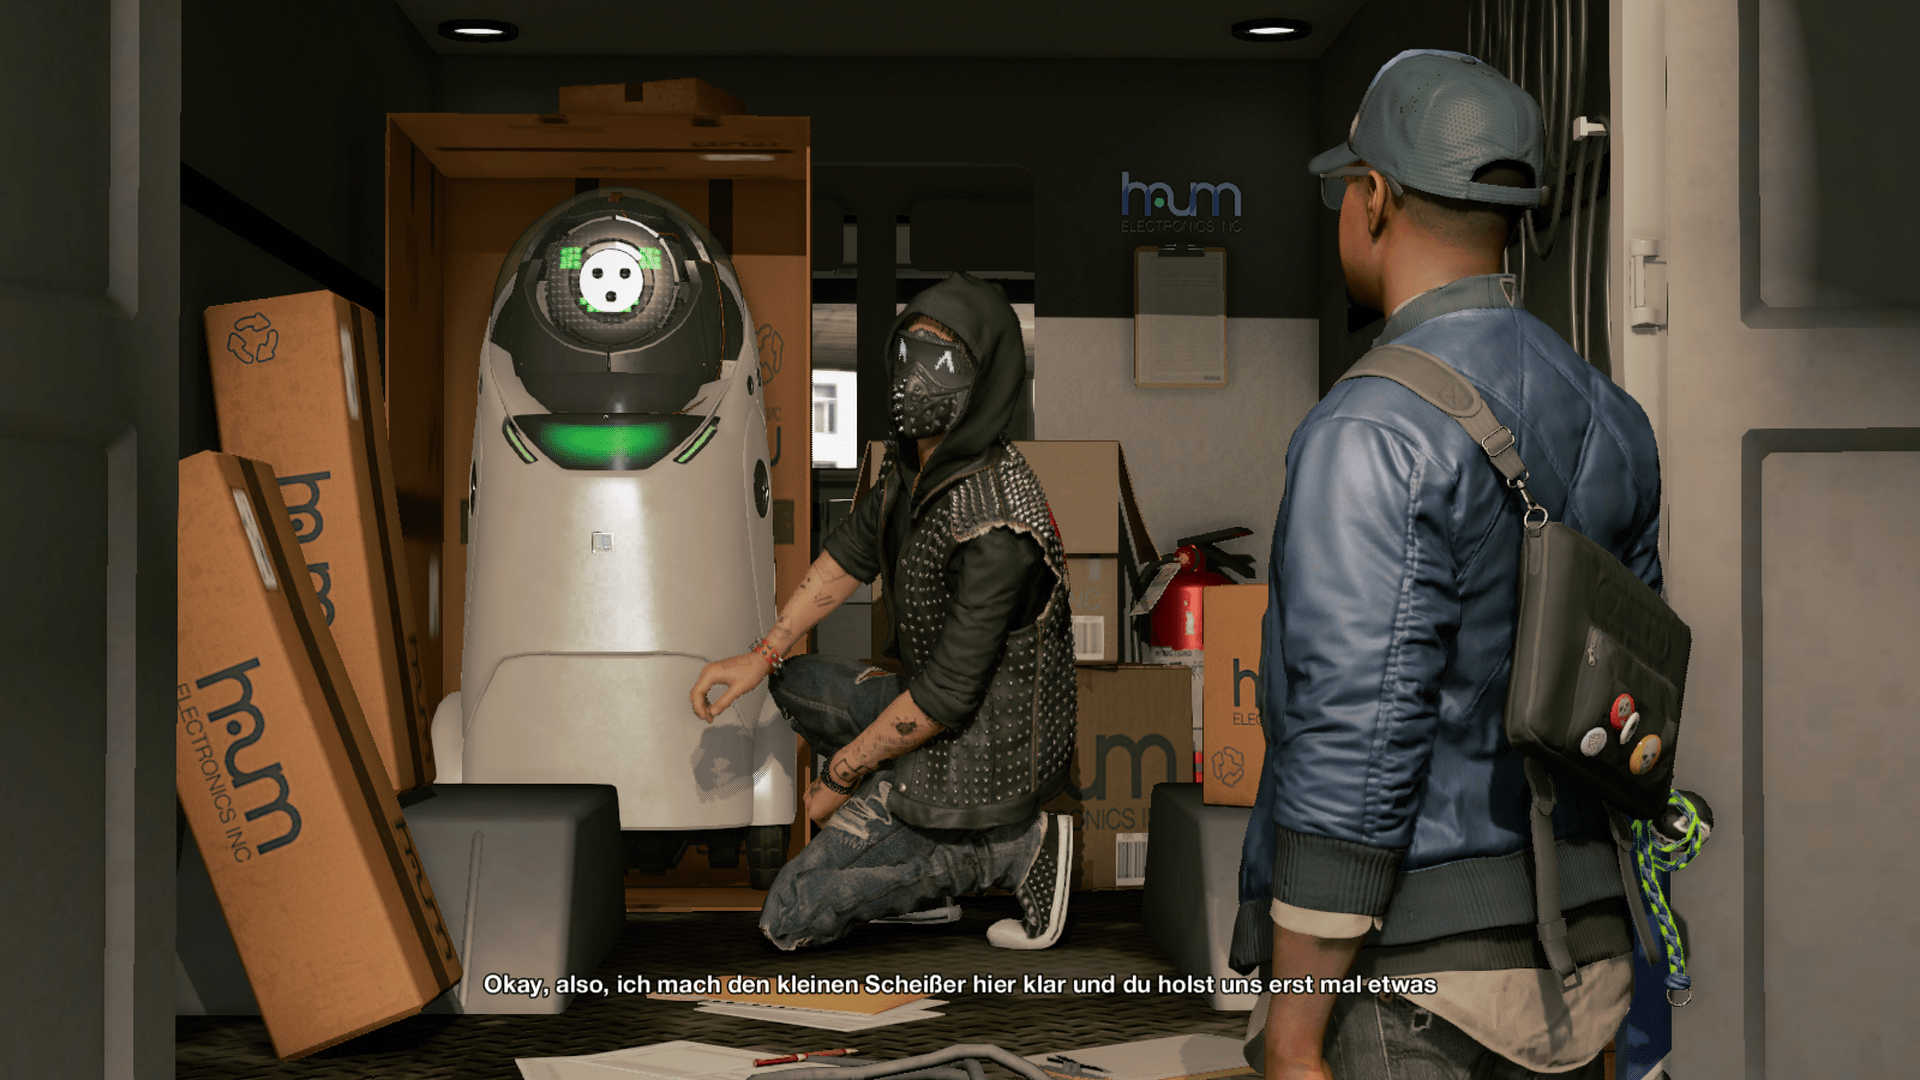 watch dogs 2 roboter